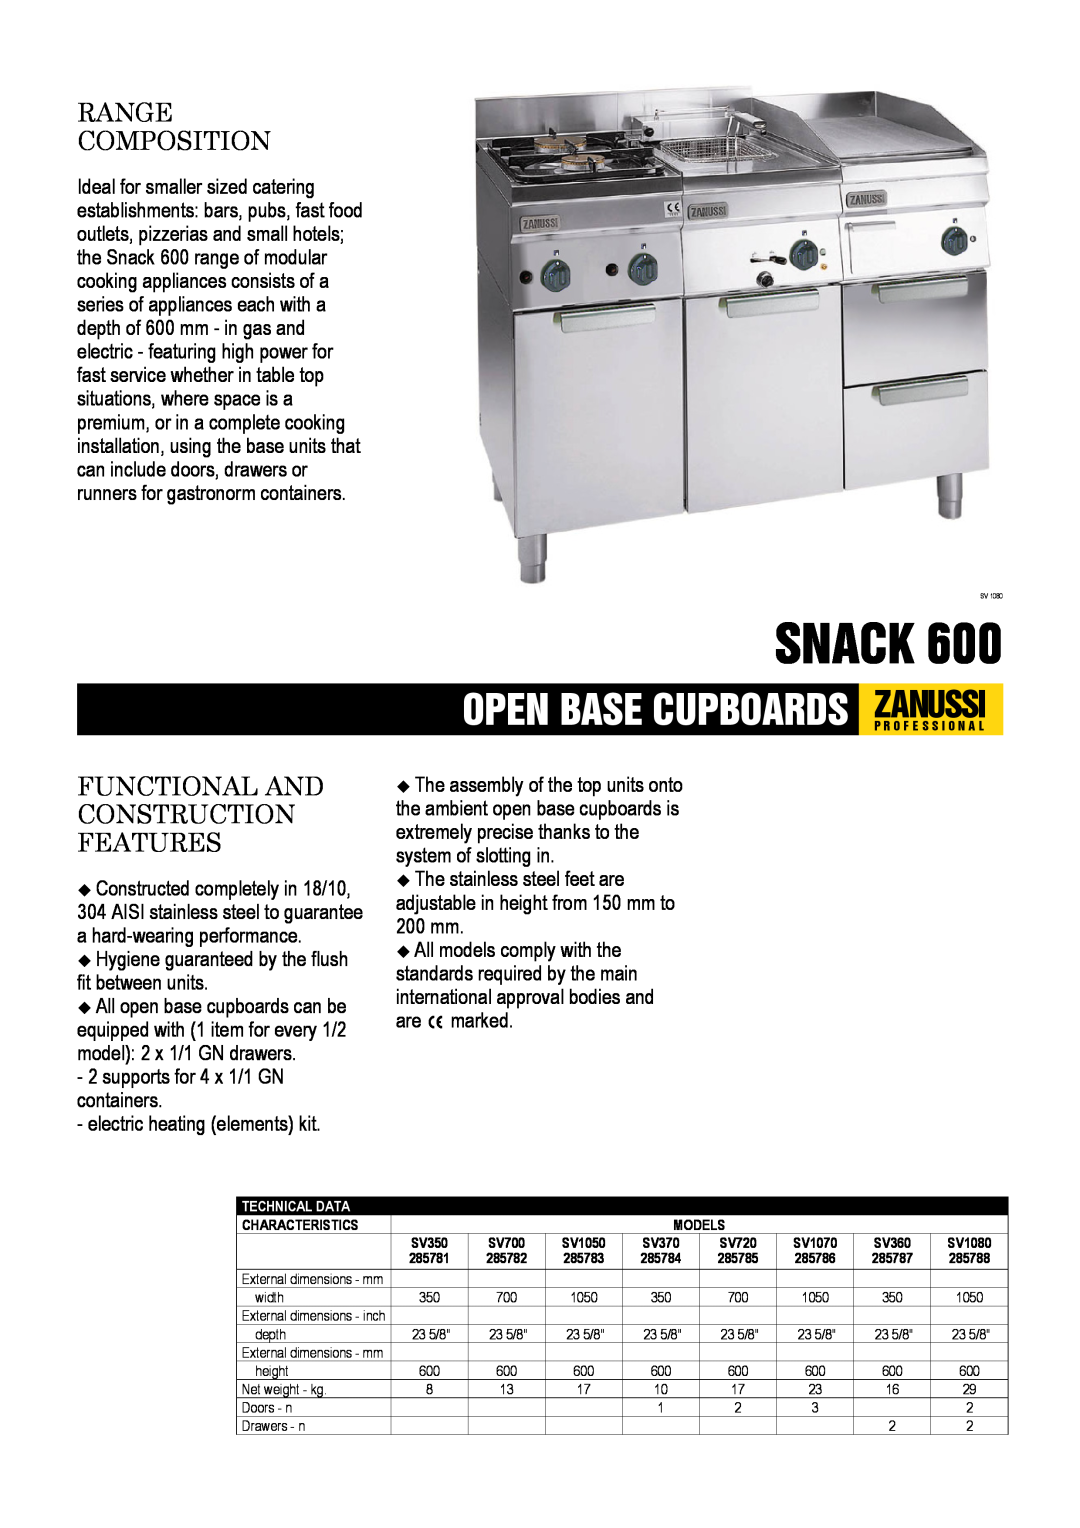 Zanussi SV 1080 dimensions Snack, Range Composition, Functional And Construction Features, electric heating elements kit 